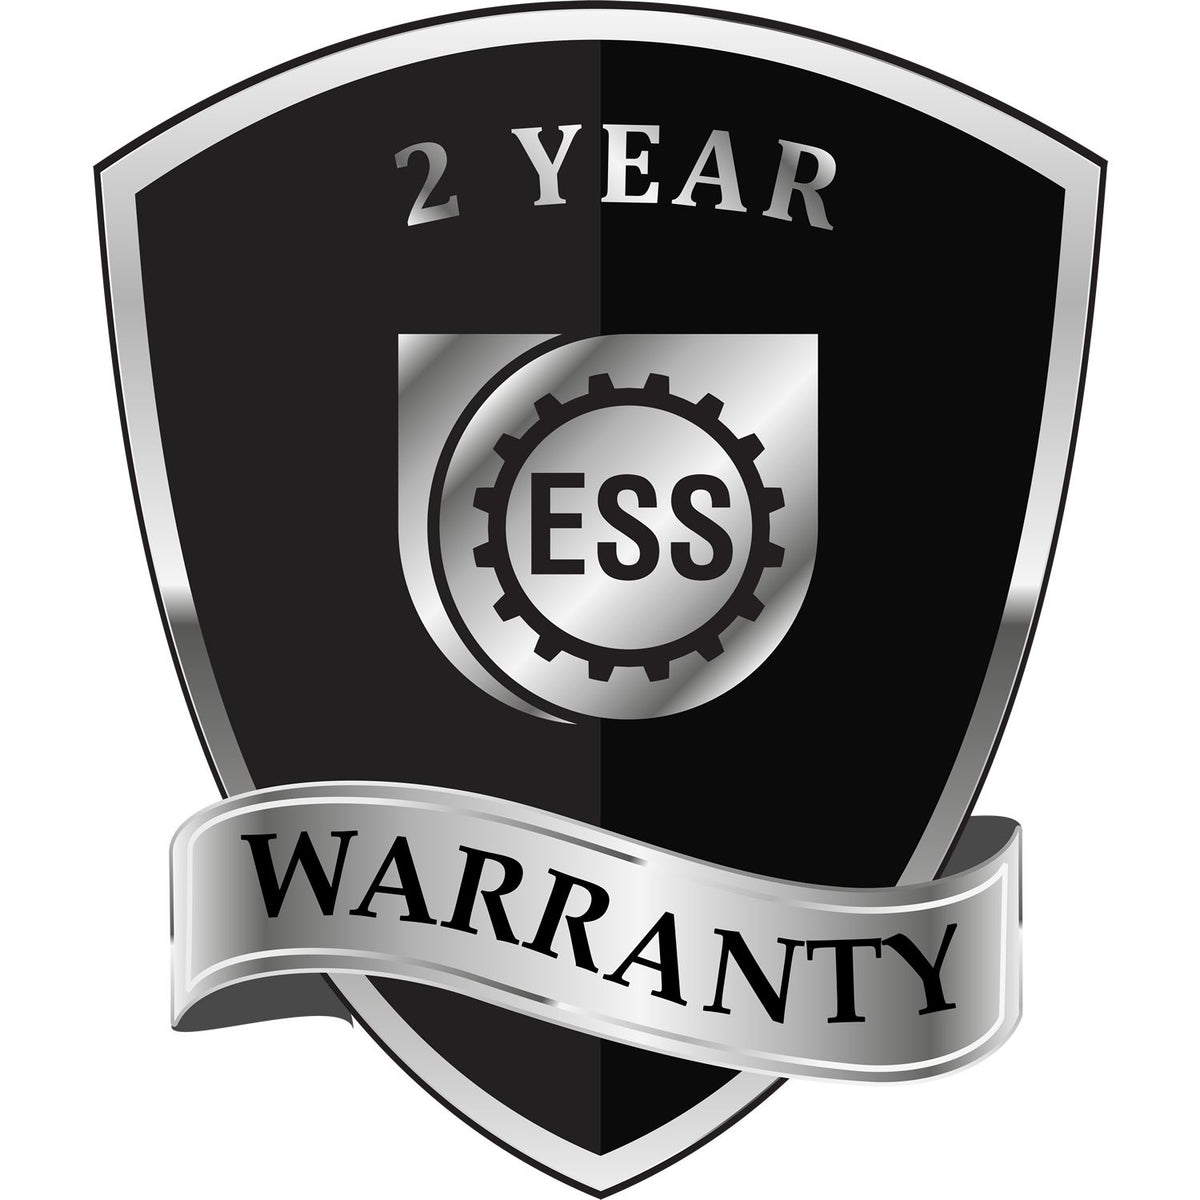 A badge or emblem showing a warranty icon for the Soft North Dakota Professional Engineer Seal